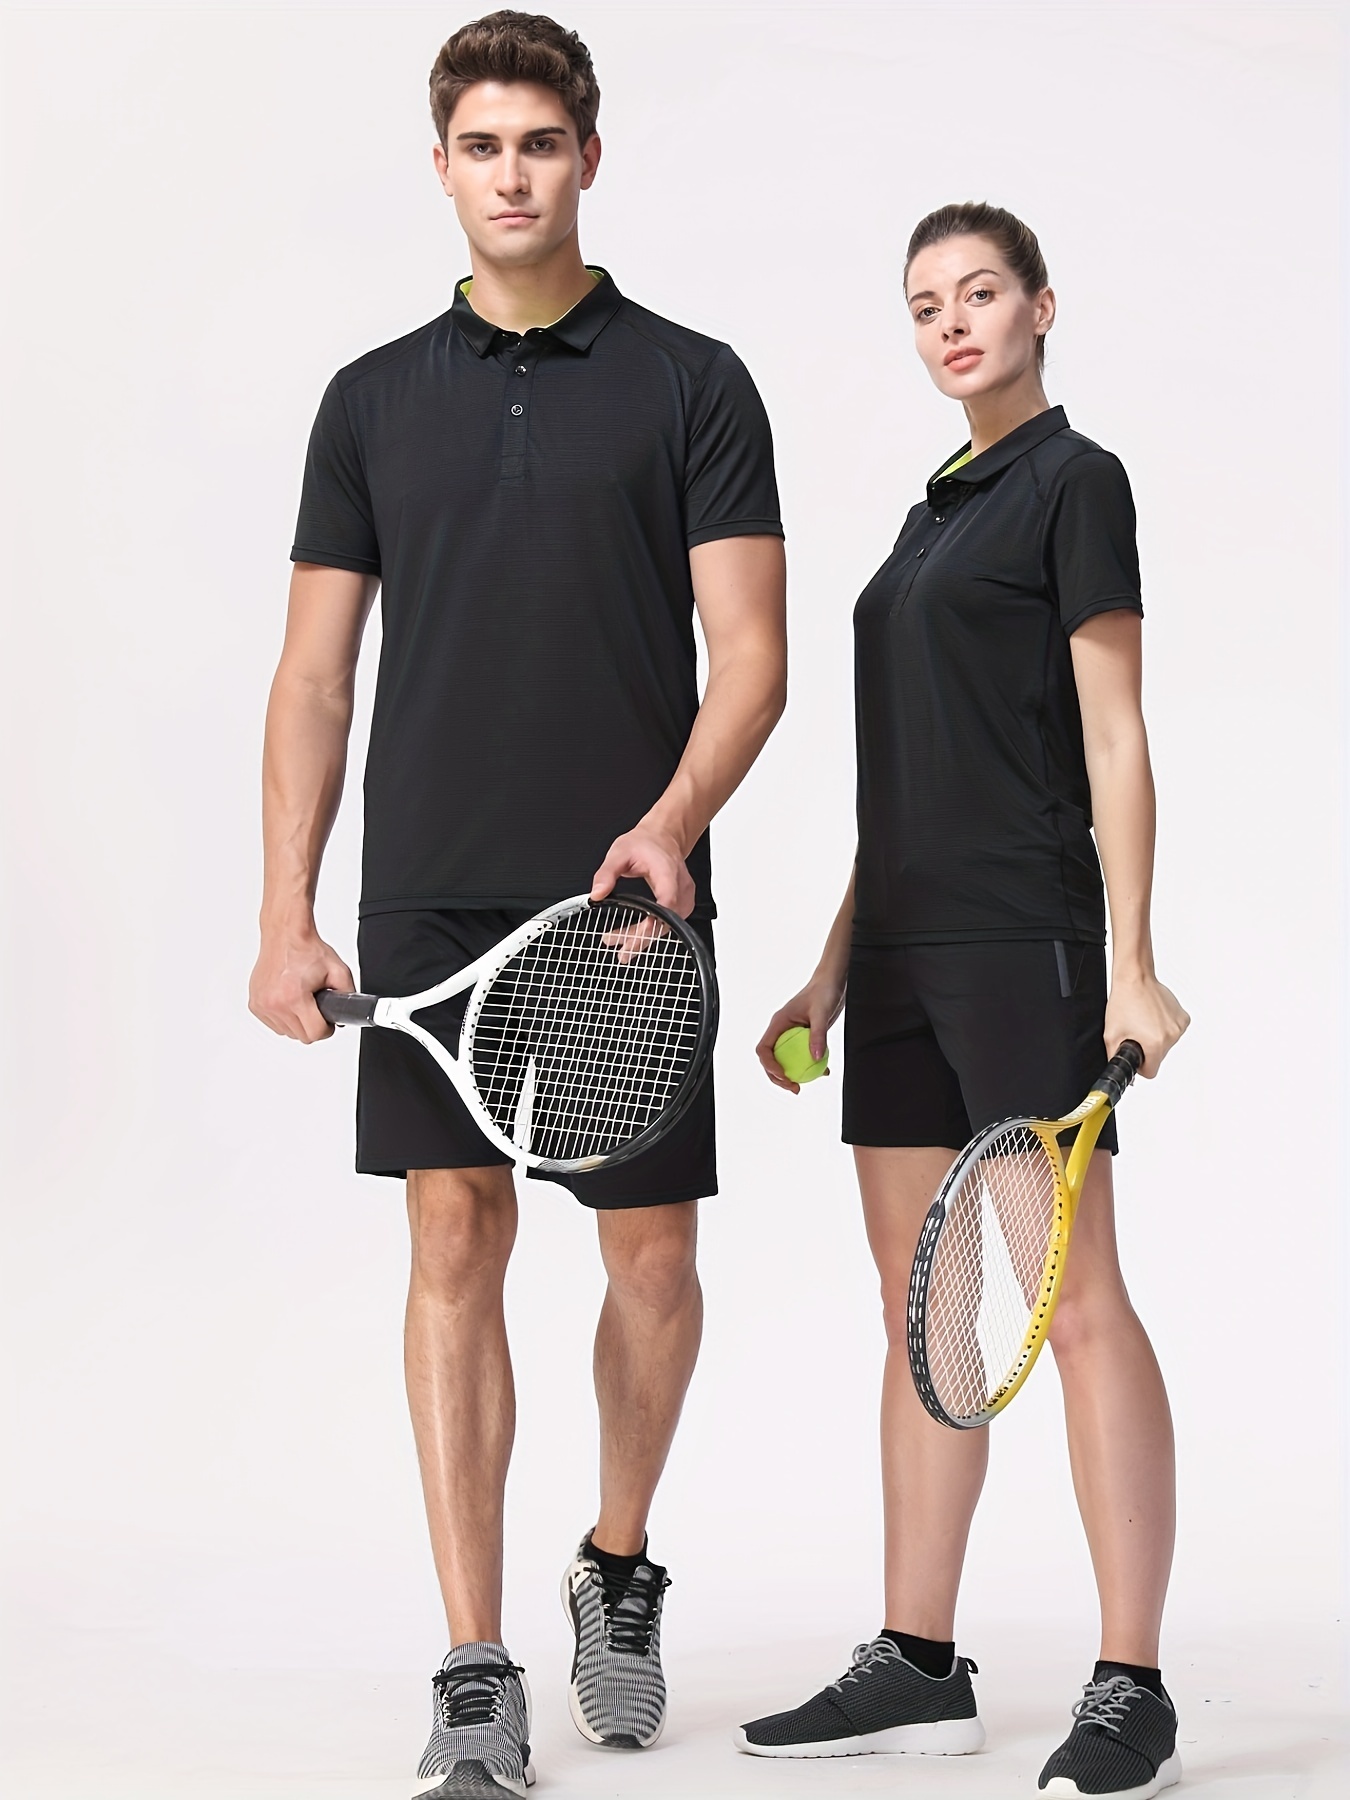 Padel collection, Women, Golf clothing